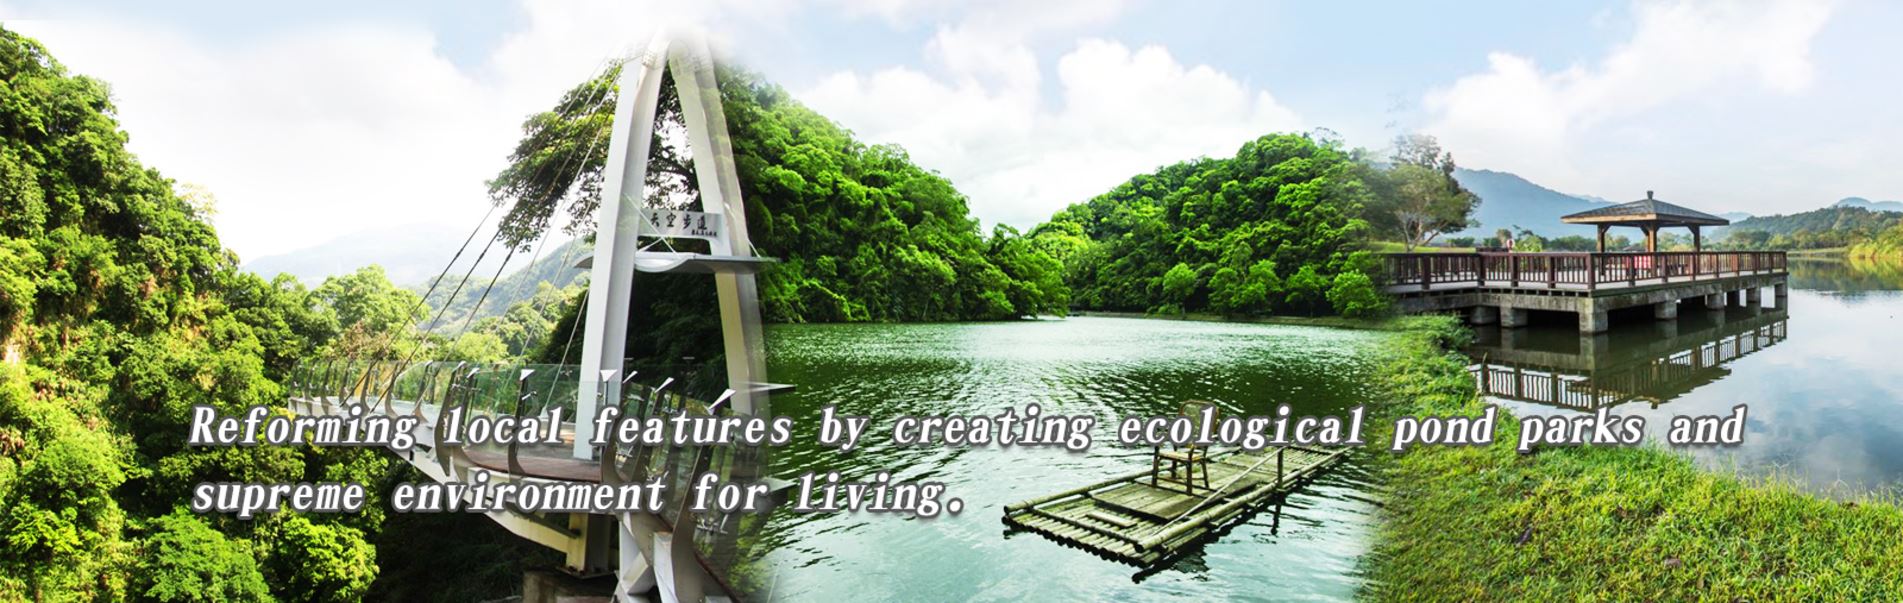 Reforming local features by creating ecological pond parks and supreme environment for living.